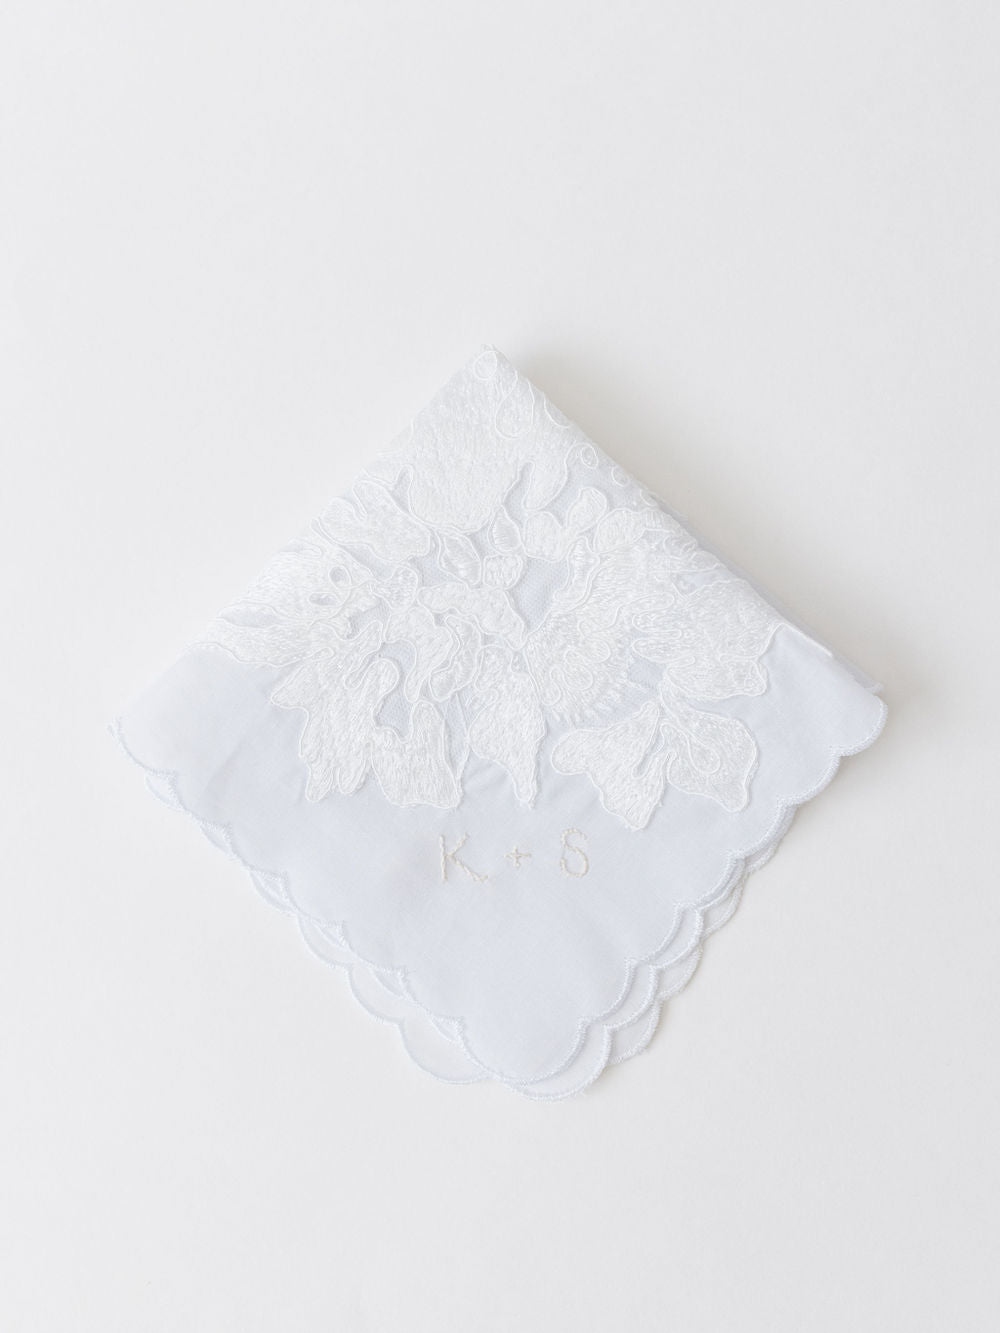 custom lace handkerchief heirloom with material from bride's wedding dress handmade by The Garter Girl